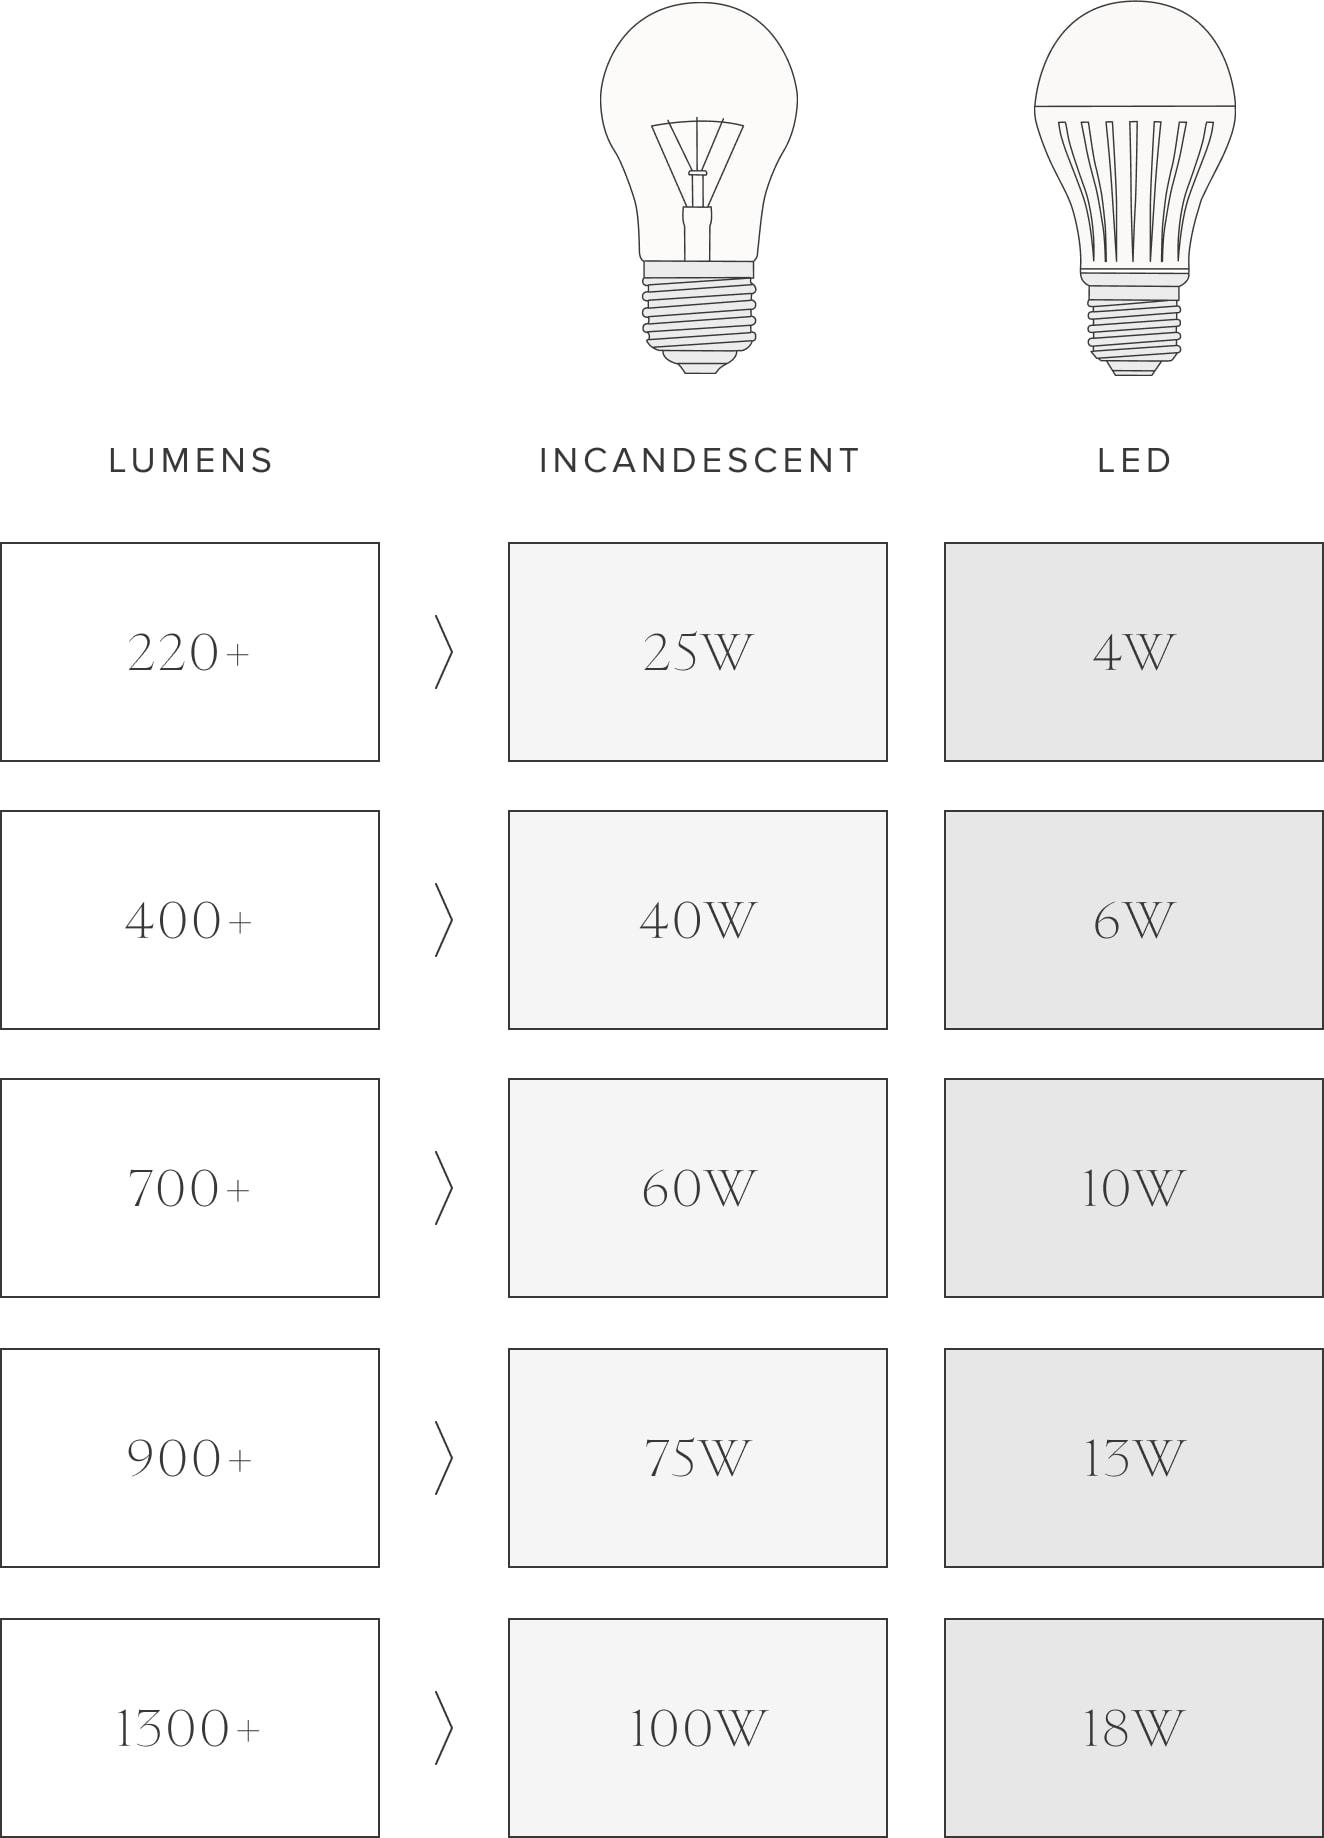 Which Light Bulb Wattage Do I Need?